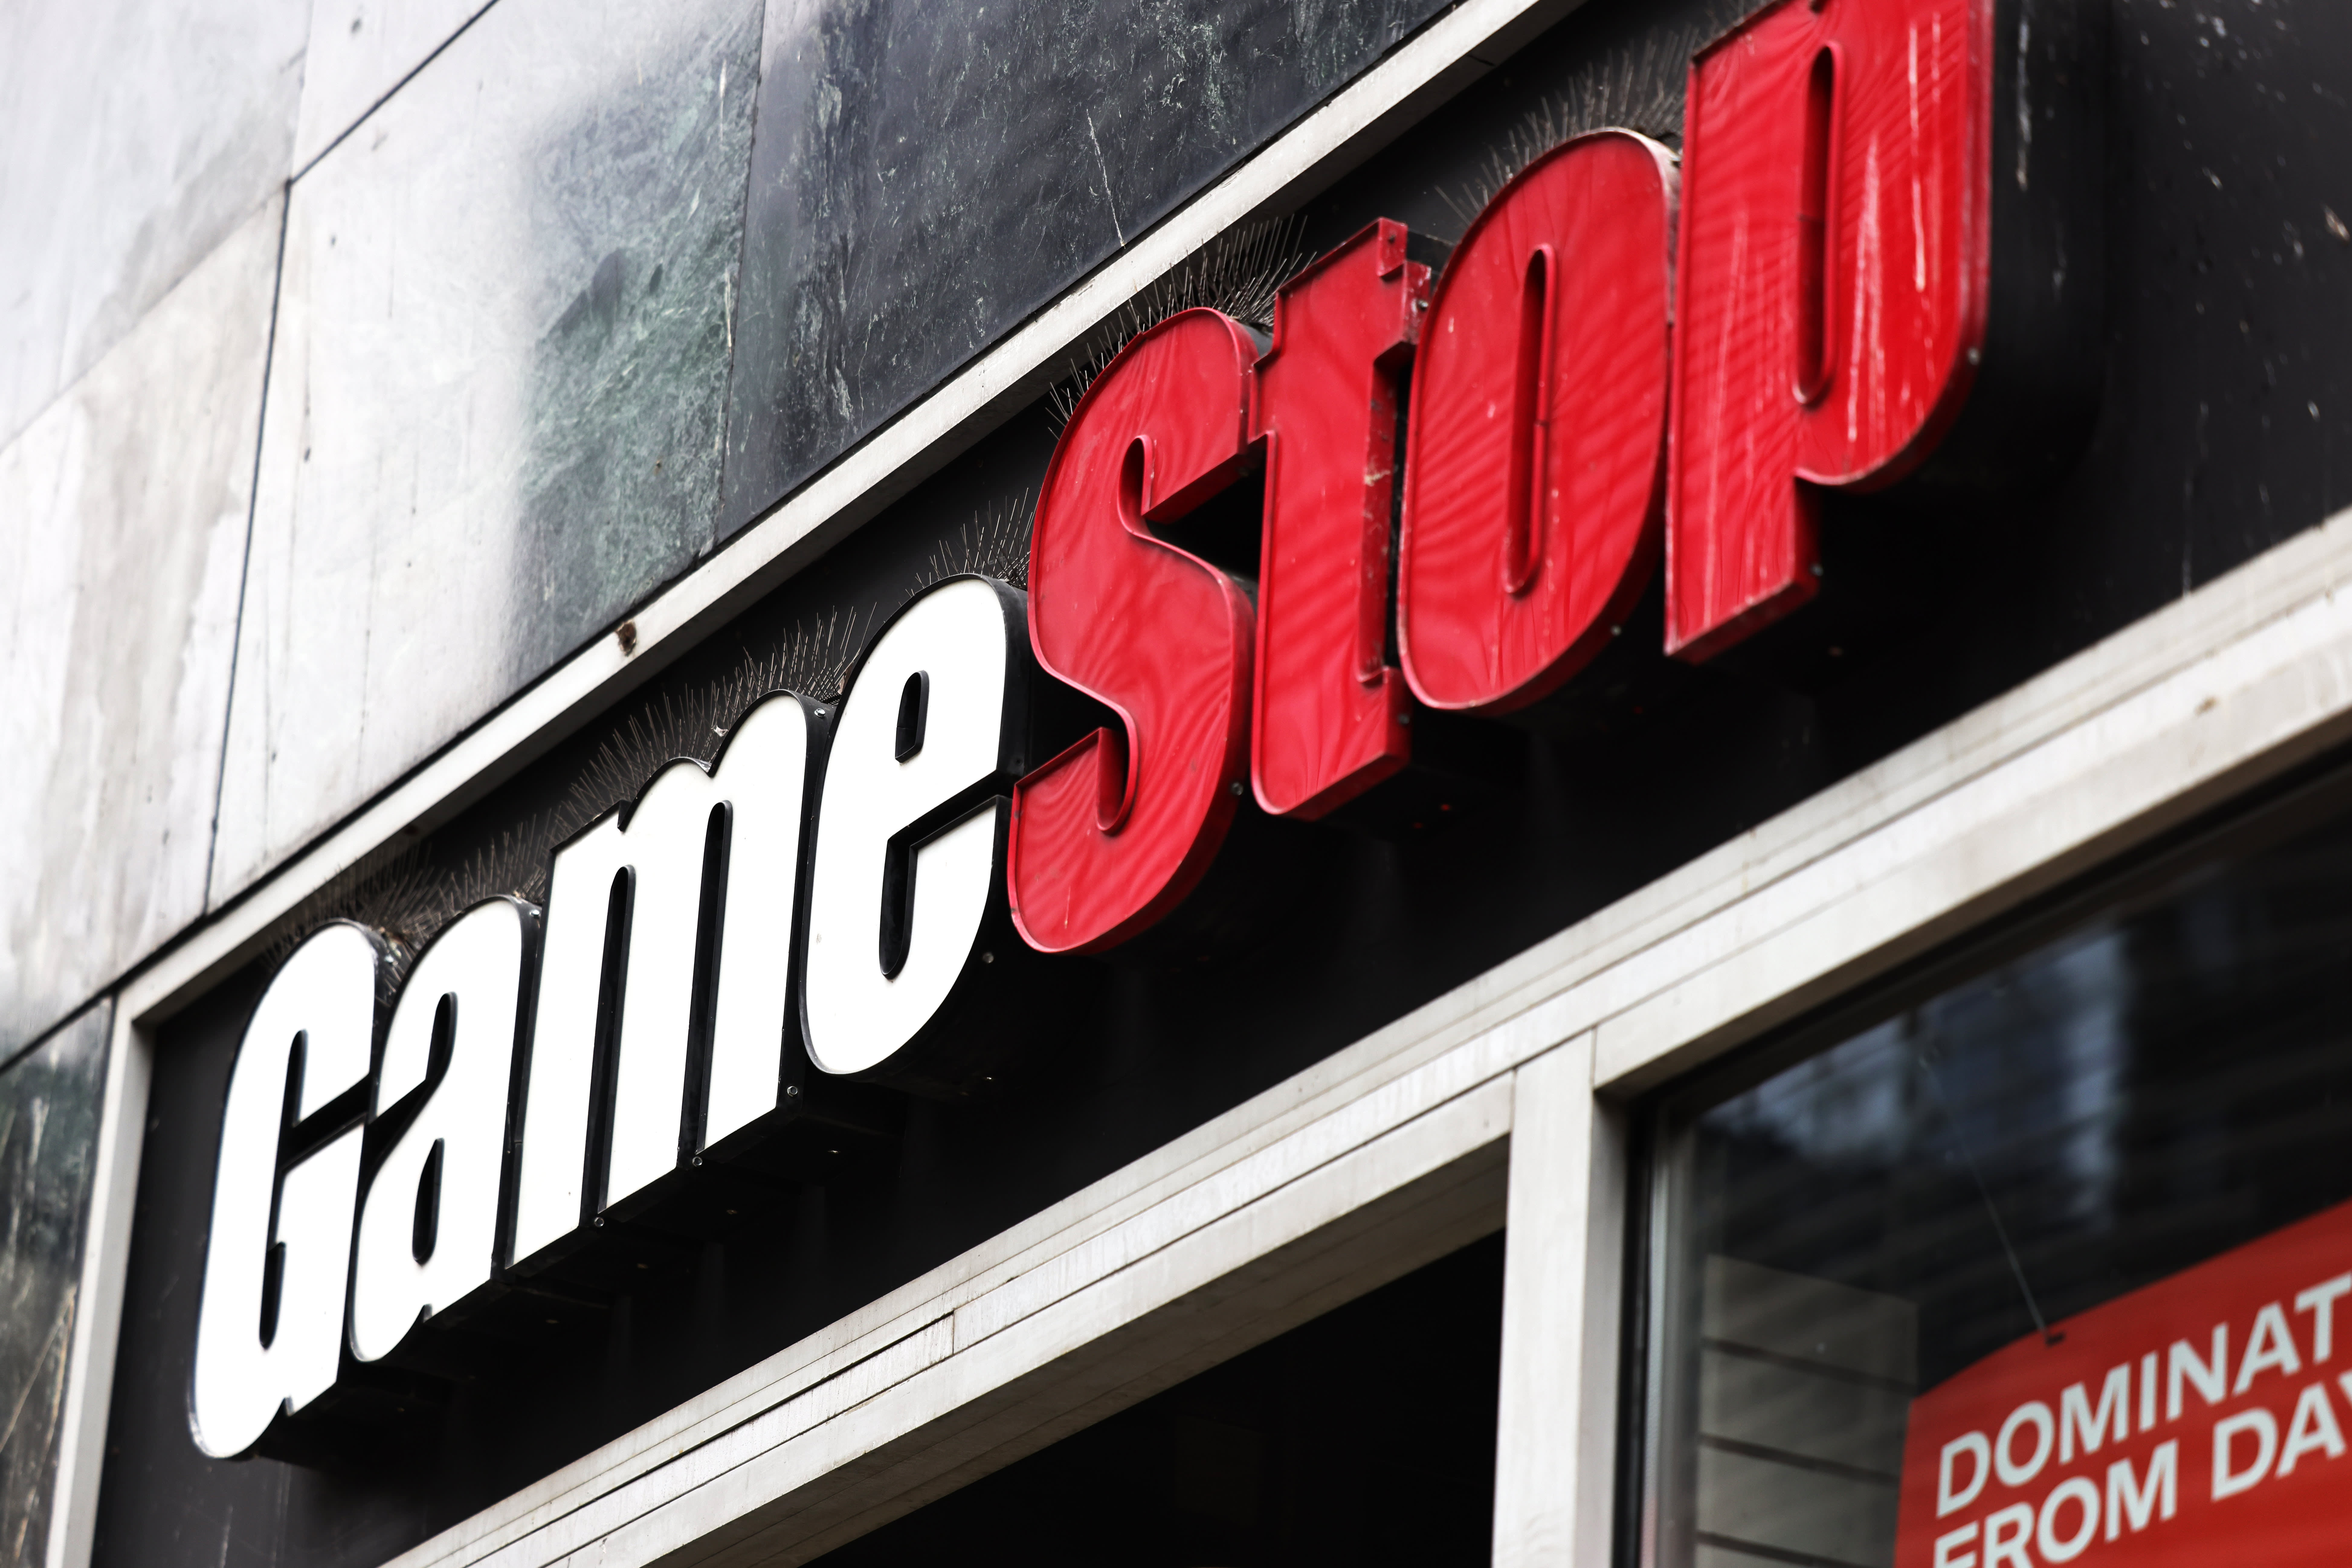 What to know about GameStop's 'once-in-a-decade' stock spike